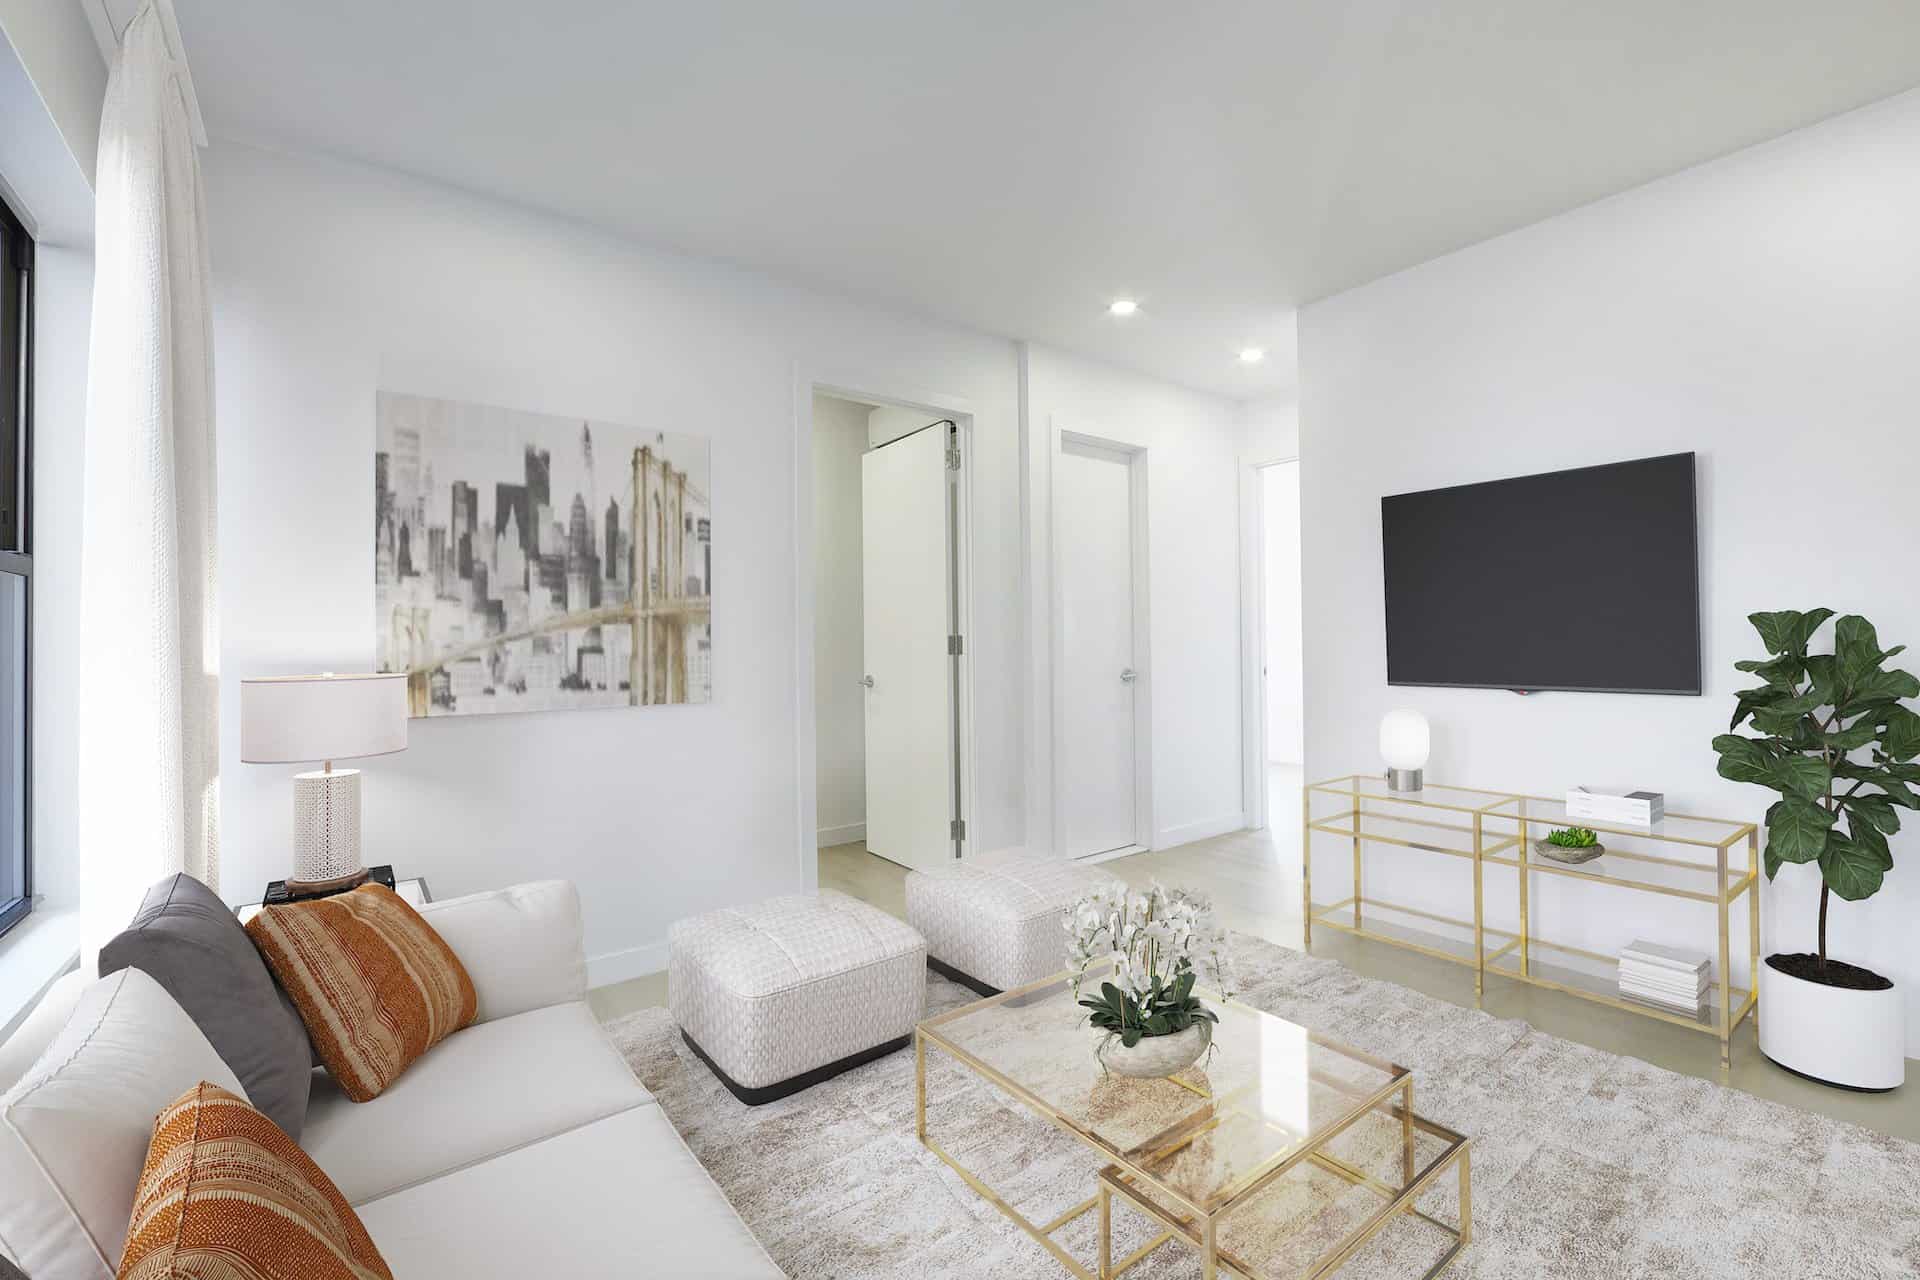 Living room at 634 East 11th Street apartments in New York. A white couch, glass coffee table, hardwood floors & mounted tv.